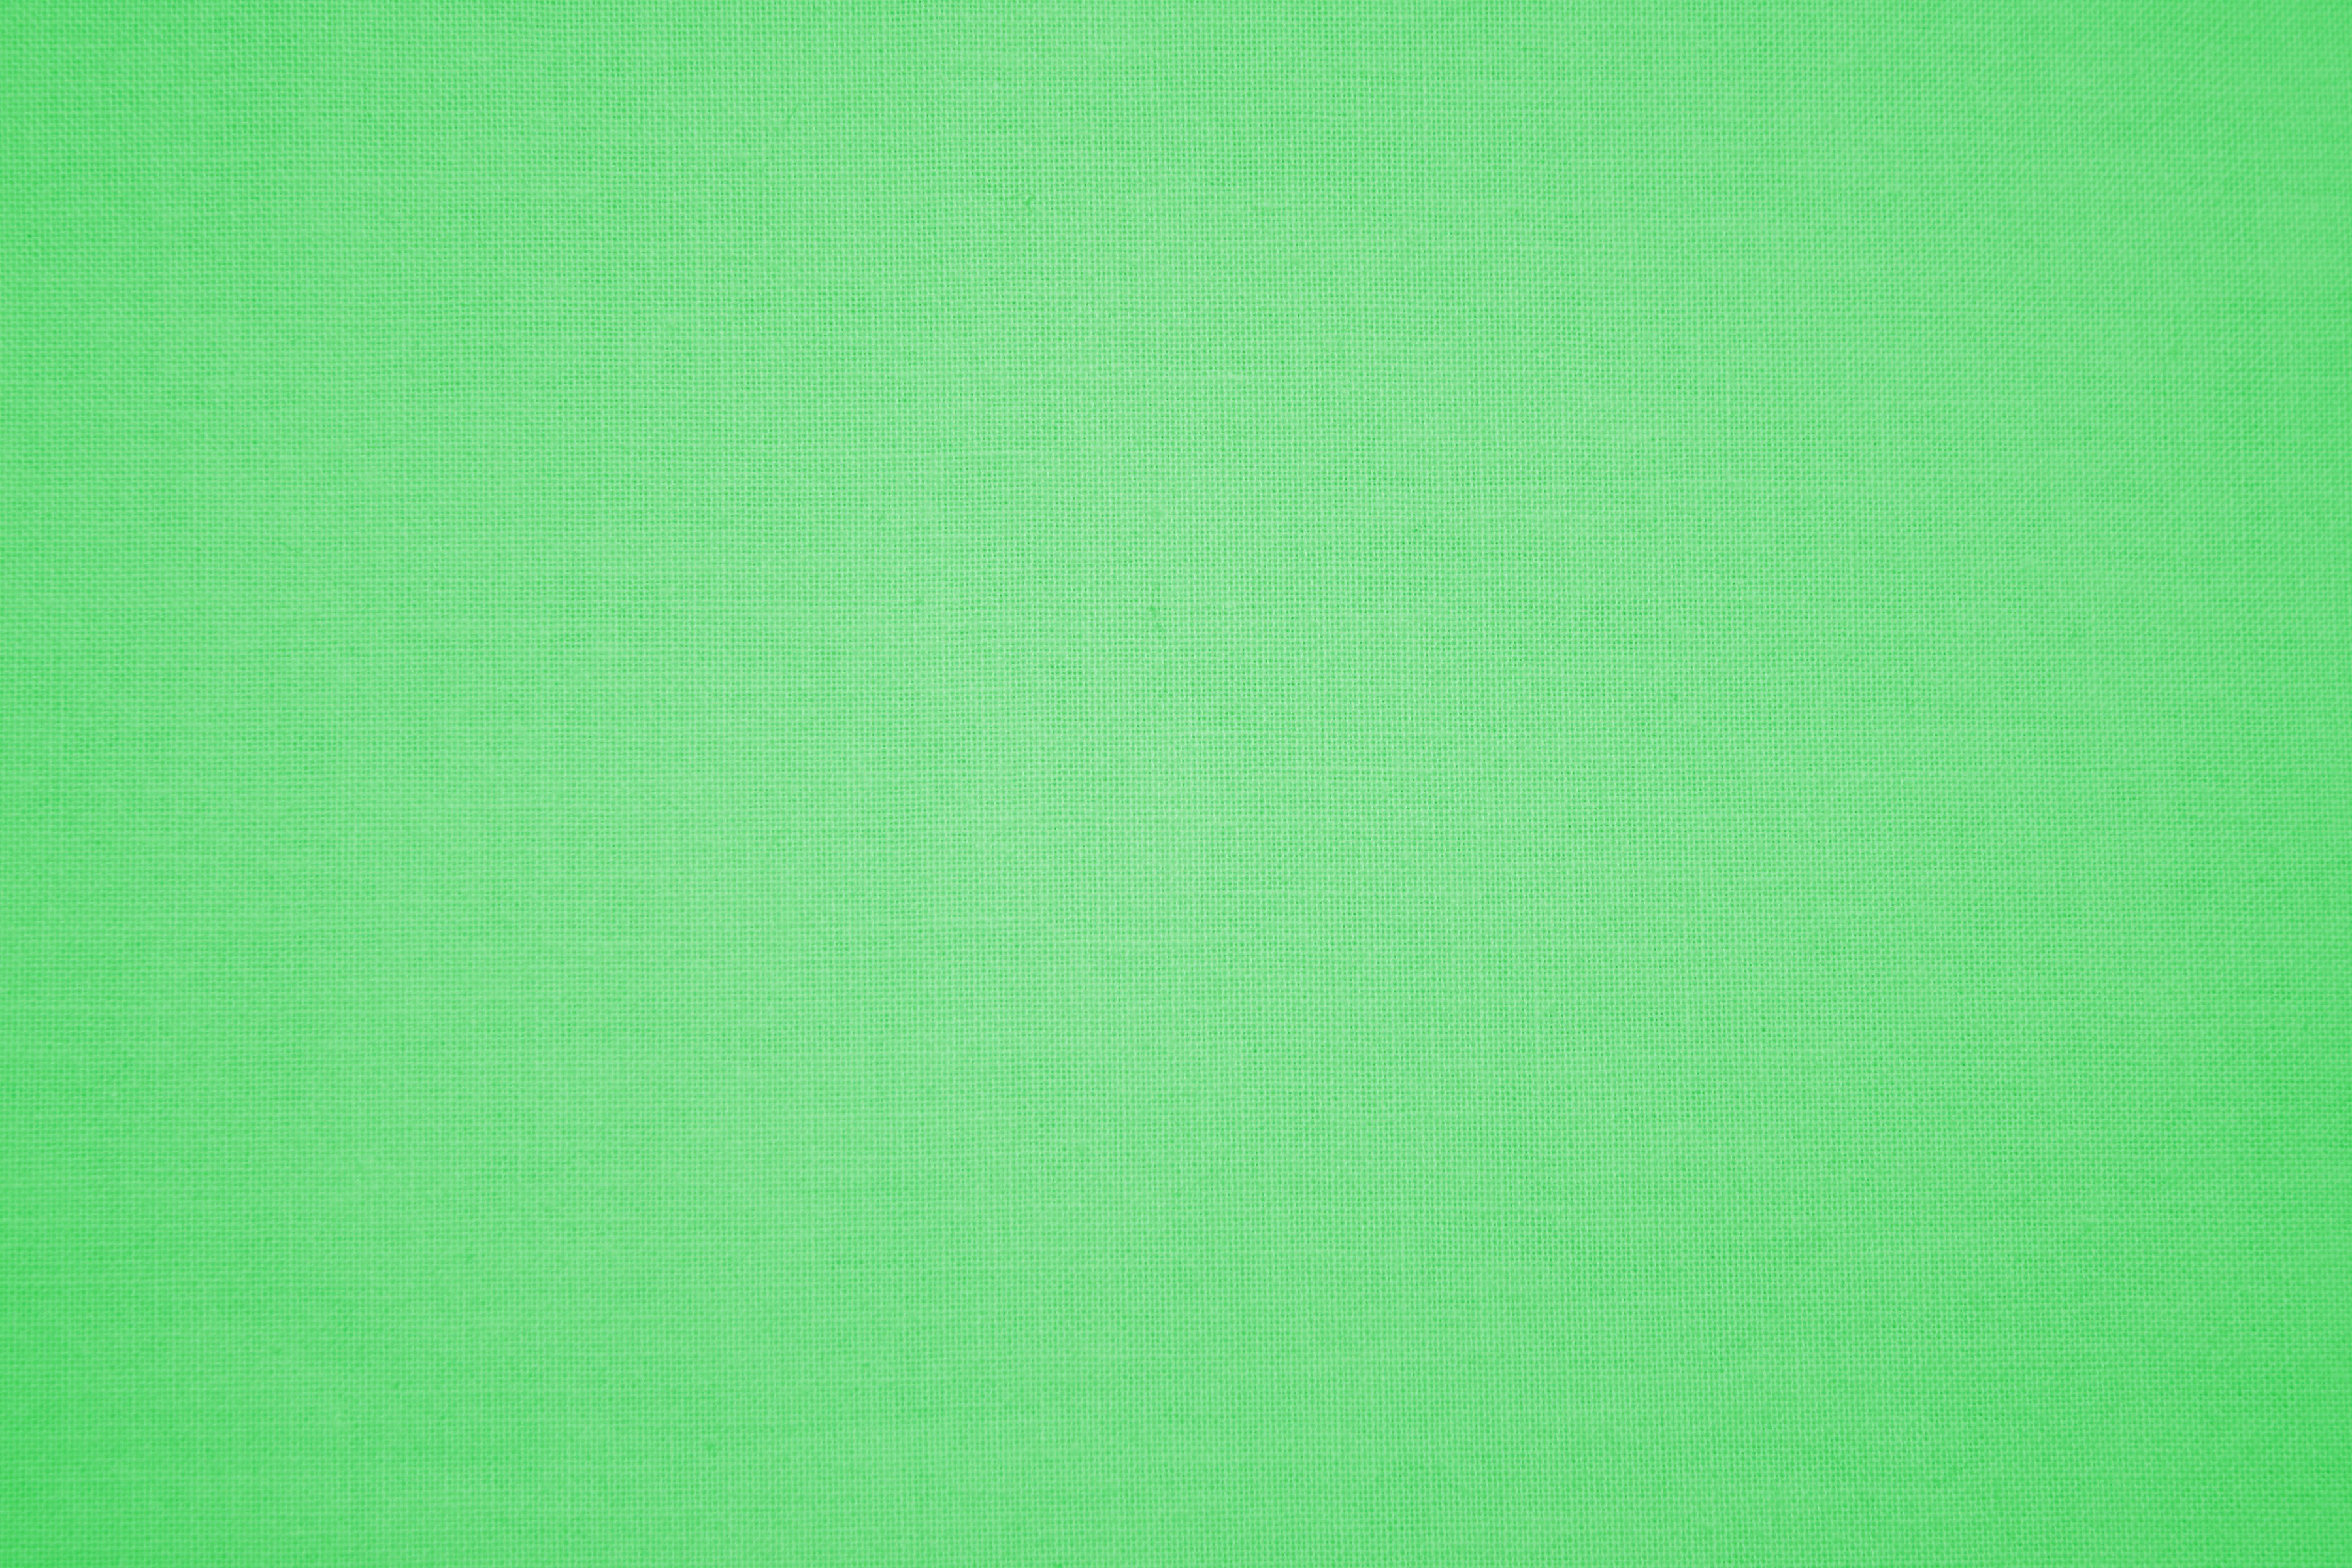 Light Green S Fabric Texture Picture